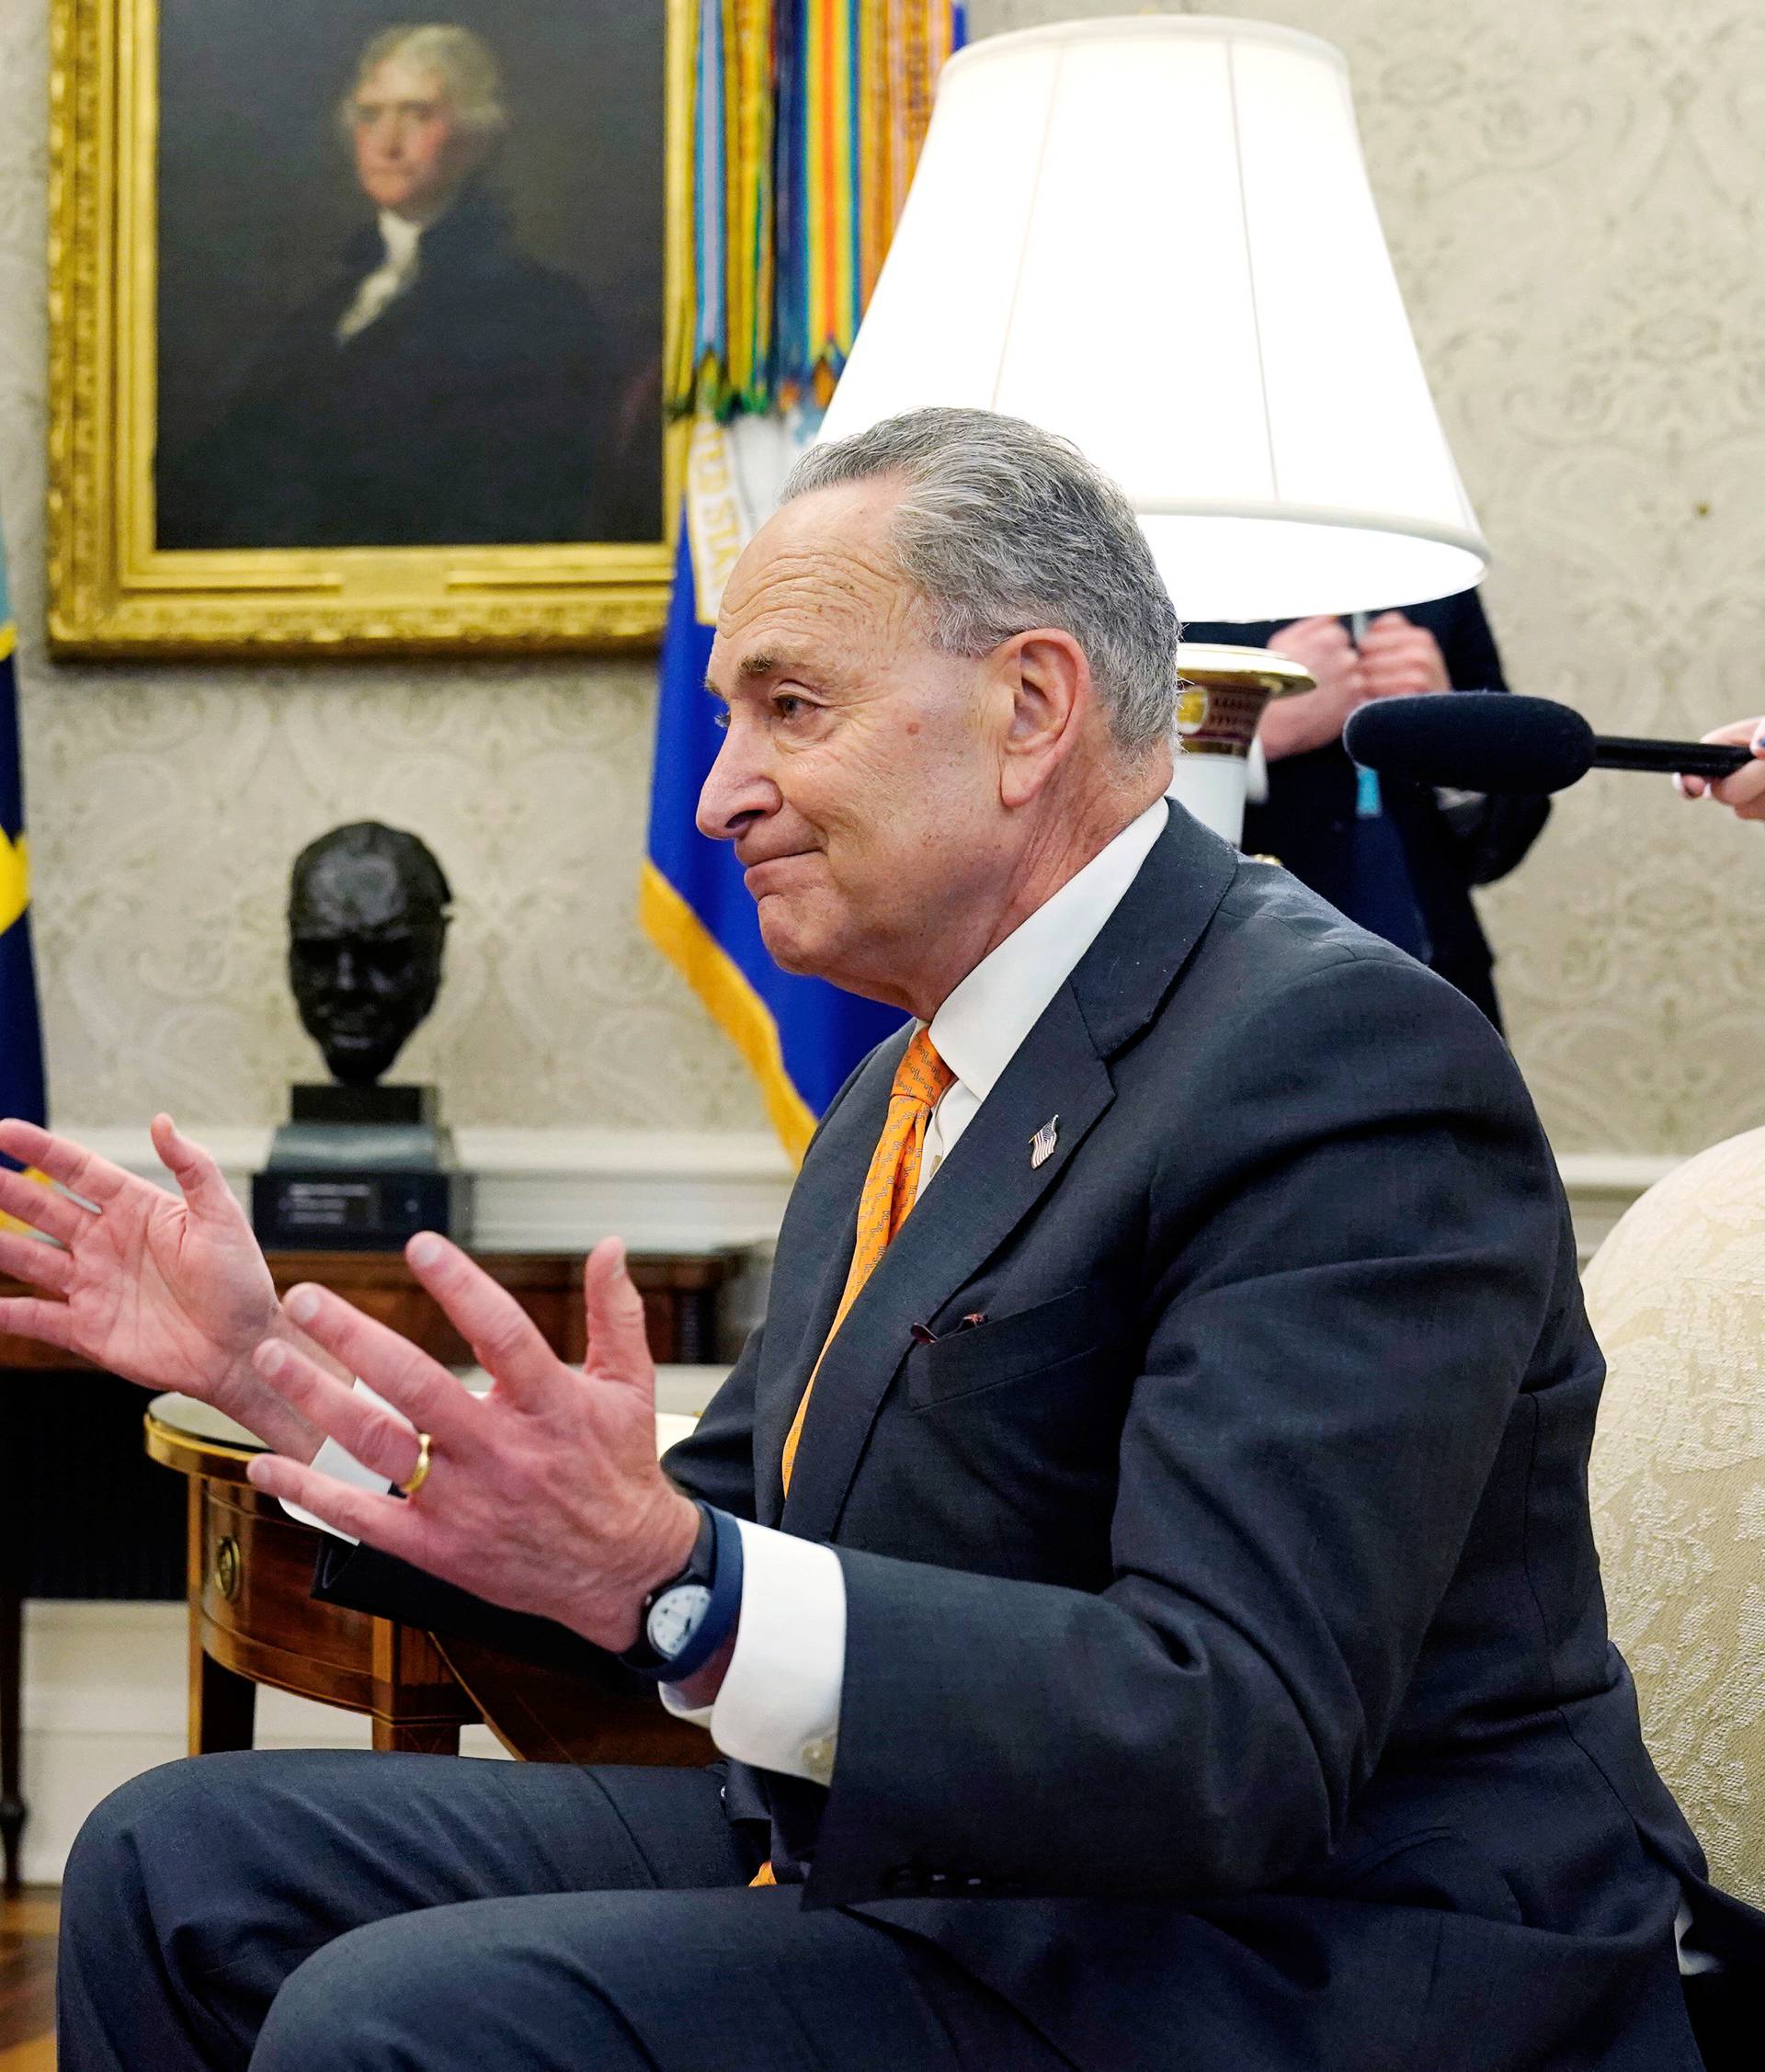 President Trump meets with Schumer and Pelosi at the White House in Washington